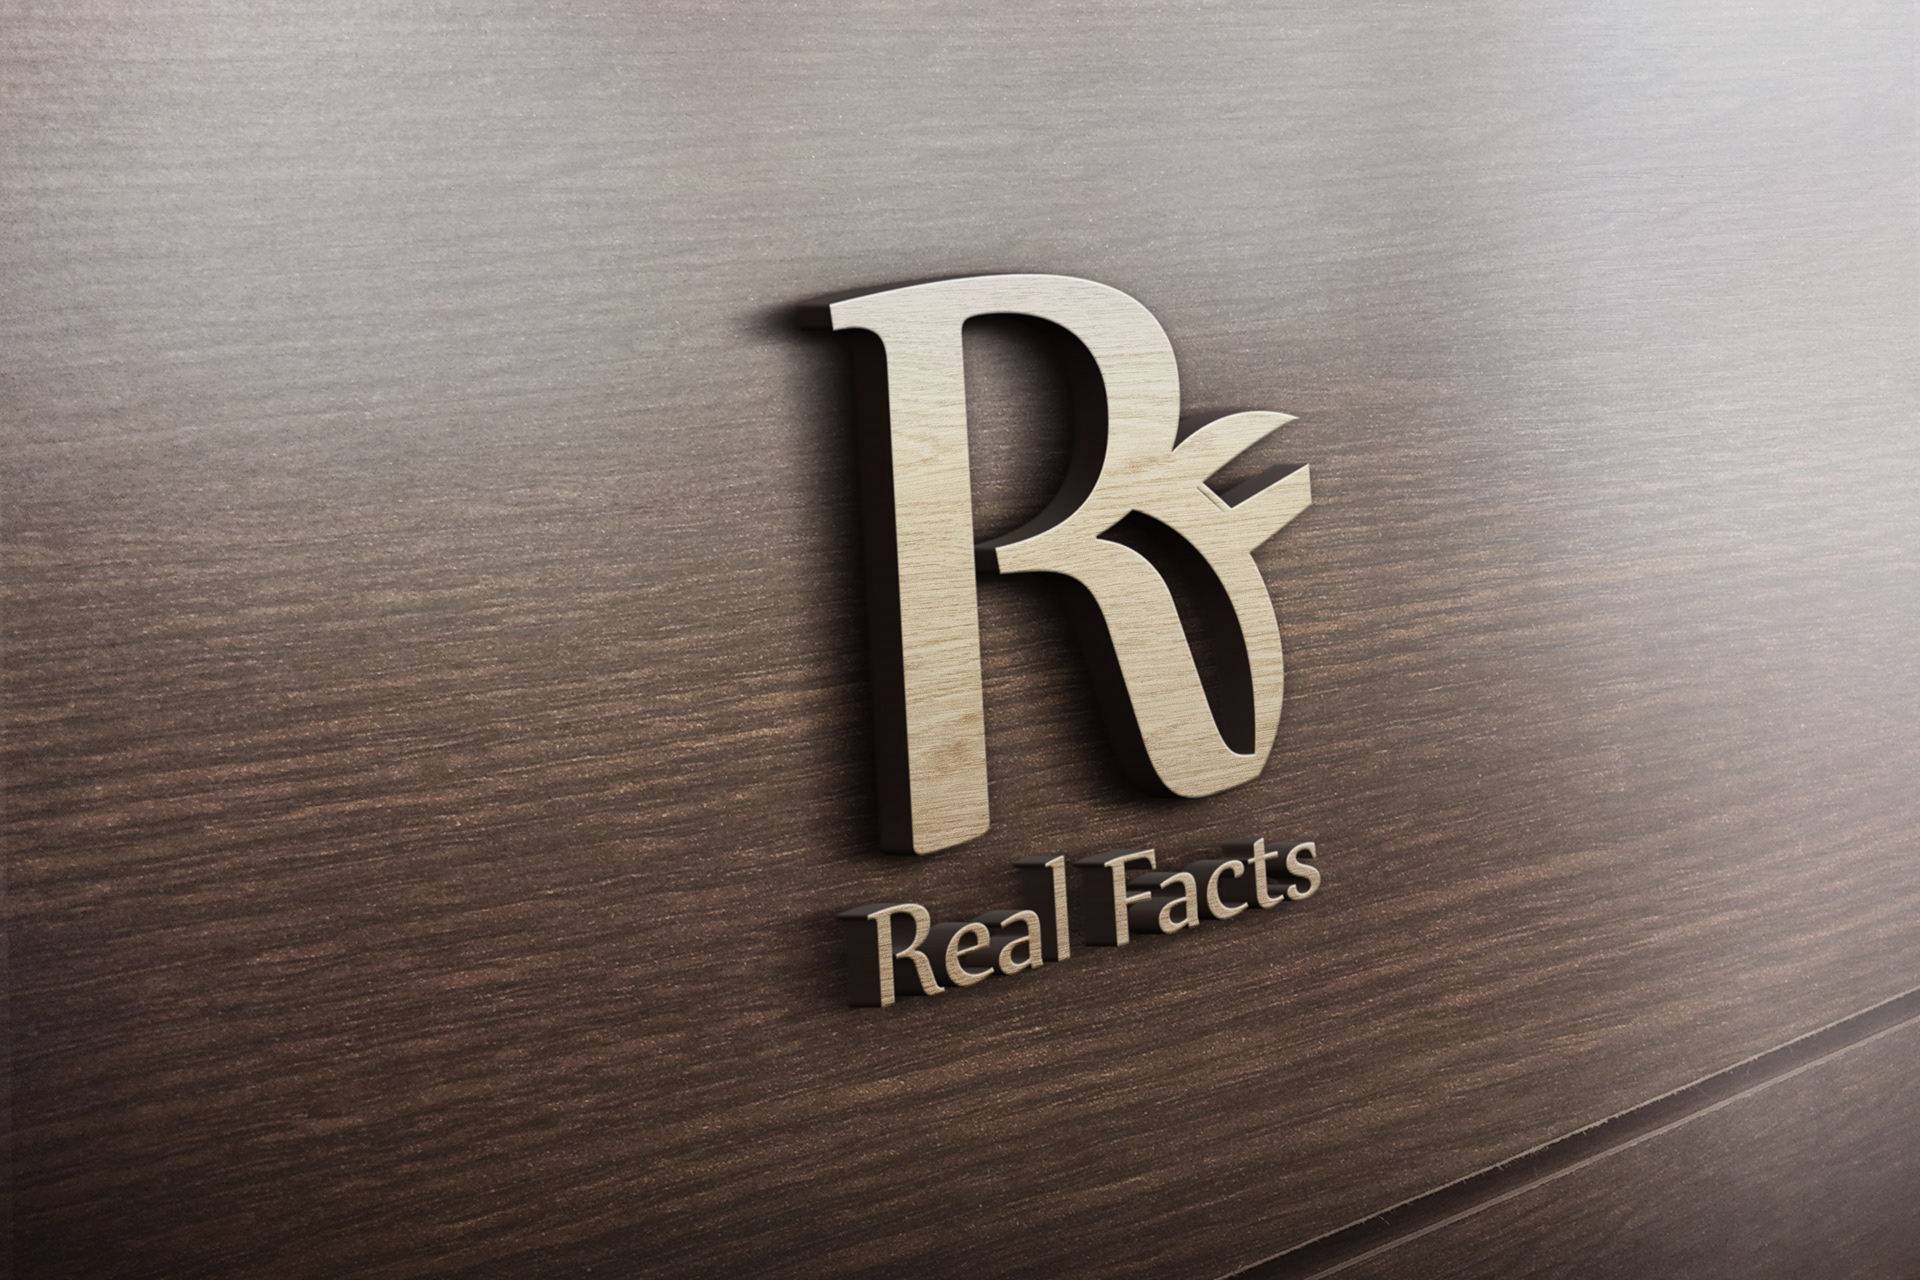 Real facts. FACCT логотип. Facts logo. New best logo. New facts logo.